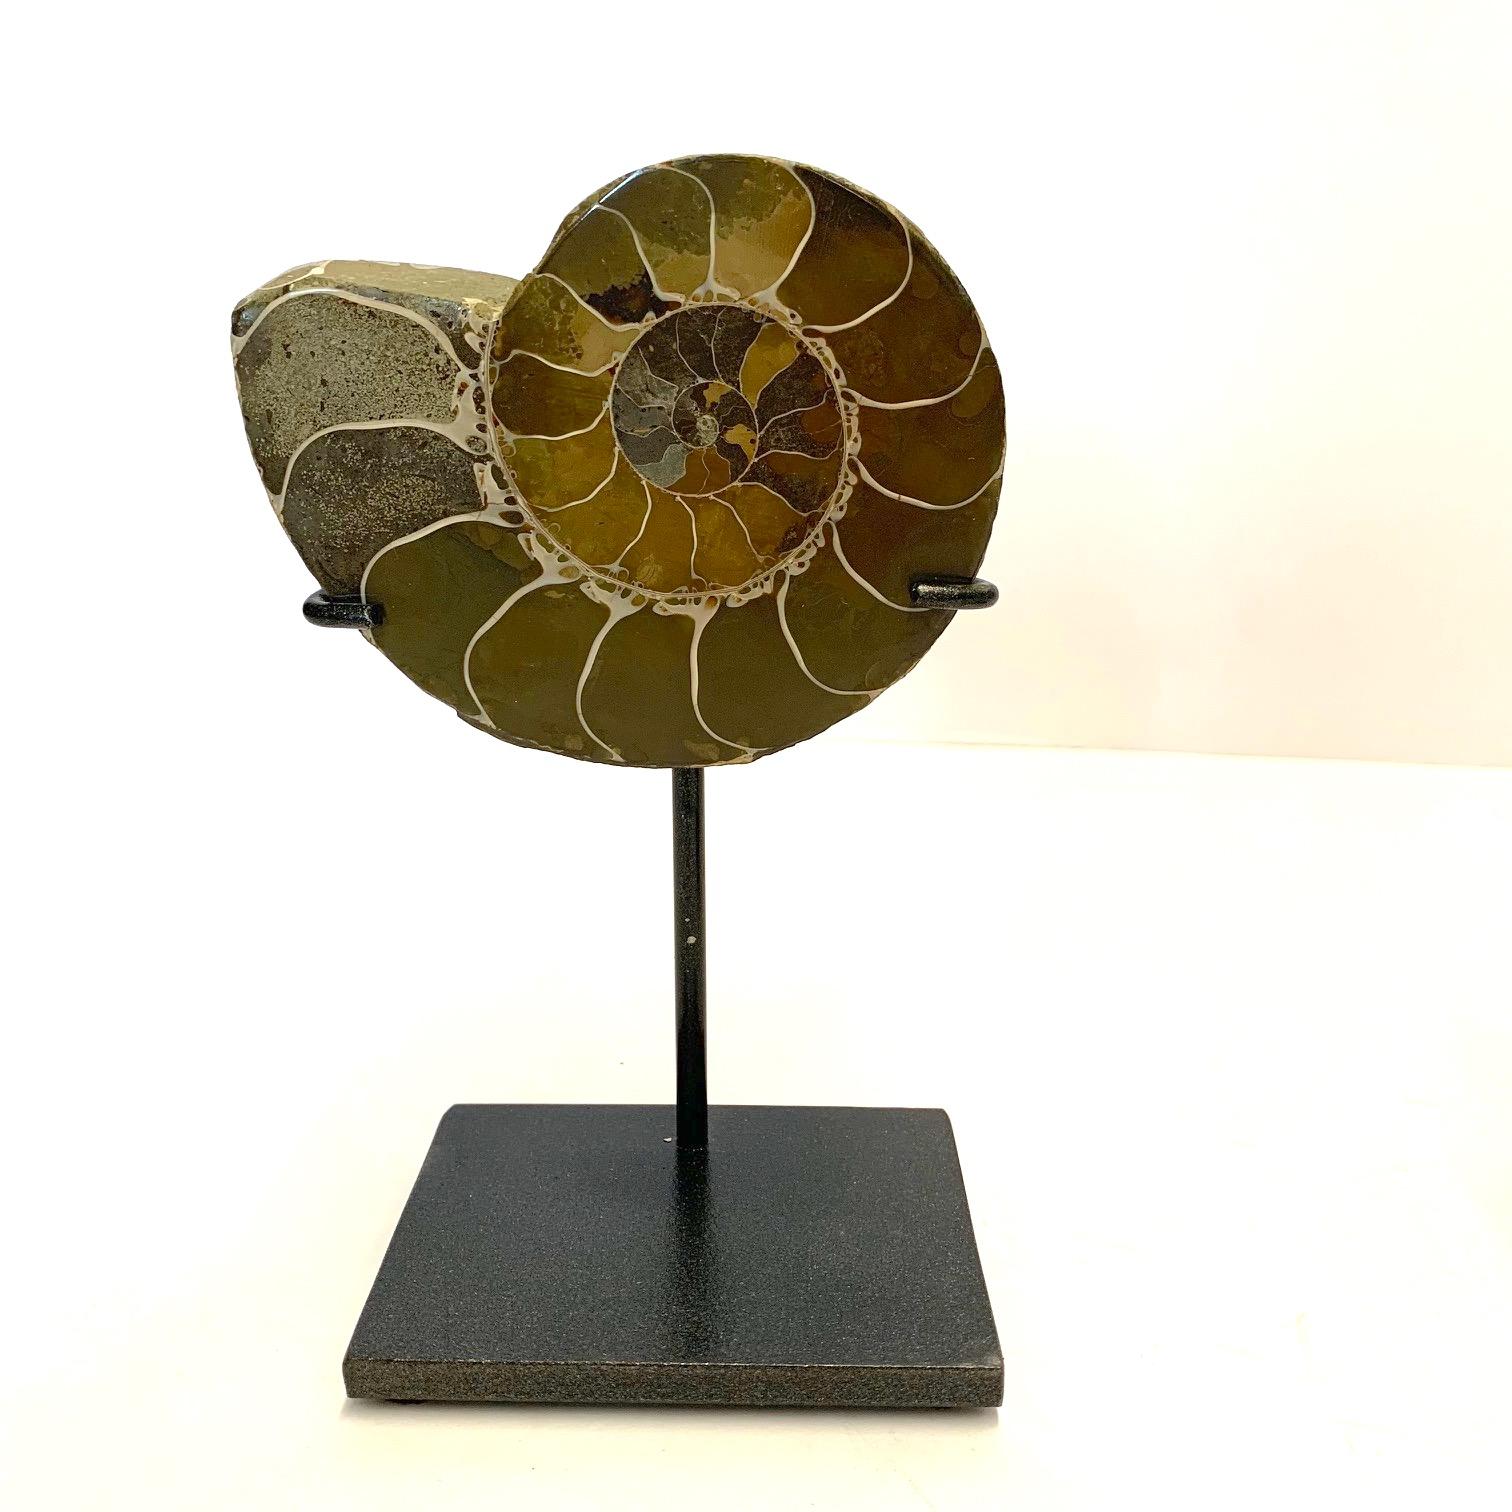 Pair of polished ammonite sculptures from Madagascar.
Custom steel stand.
One of many from a large collection
Ammonite A 3